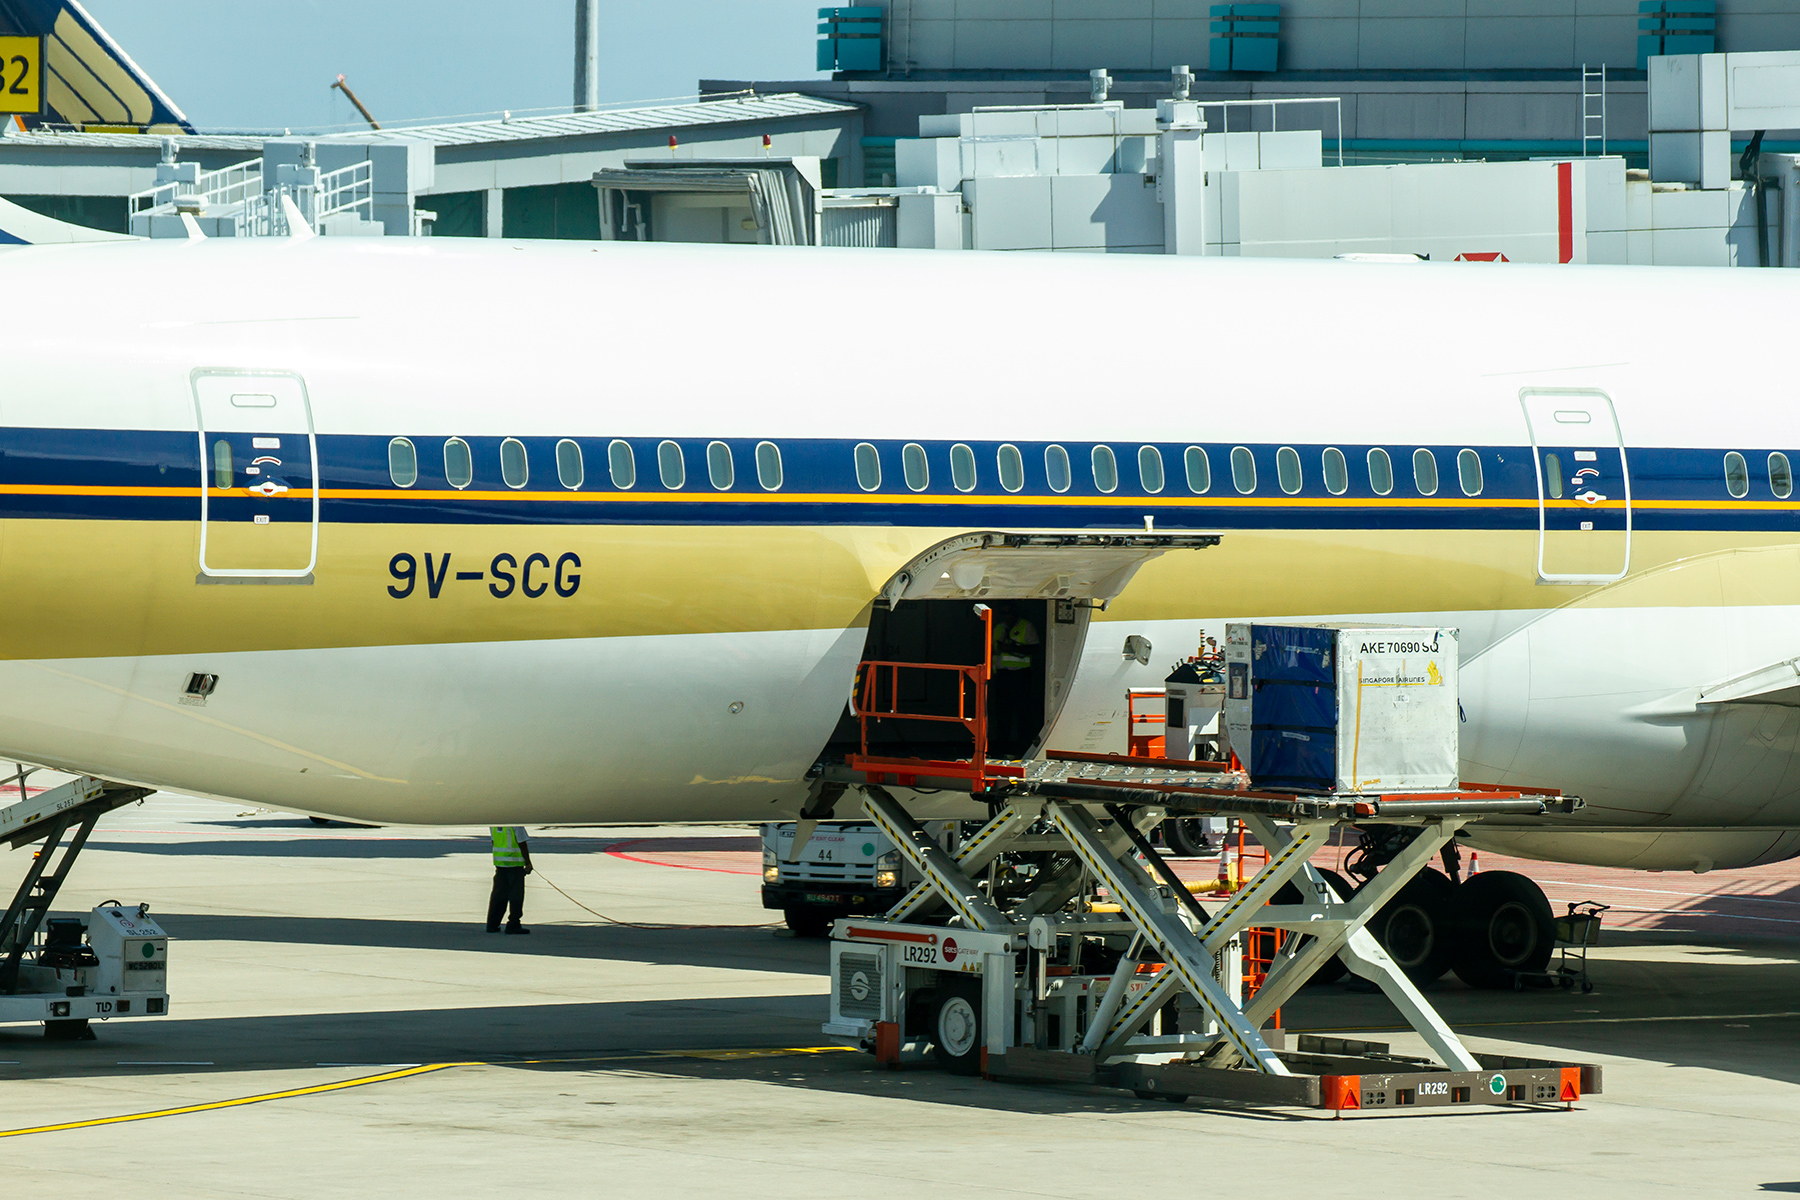 An airplane with cargo being loaded.